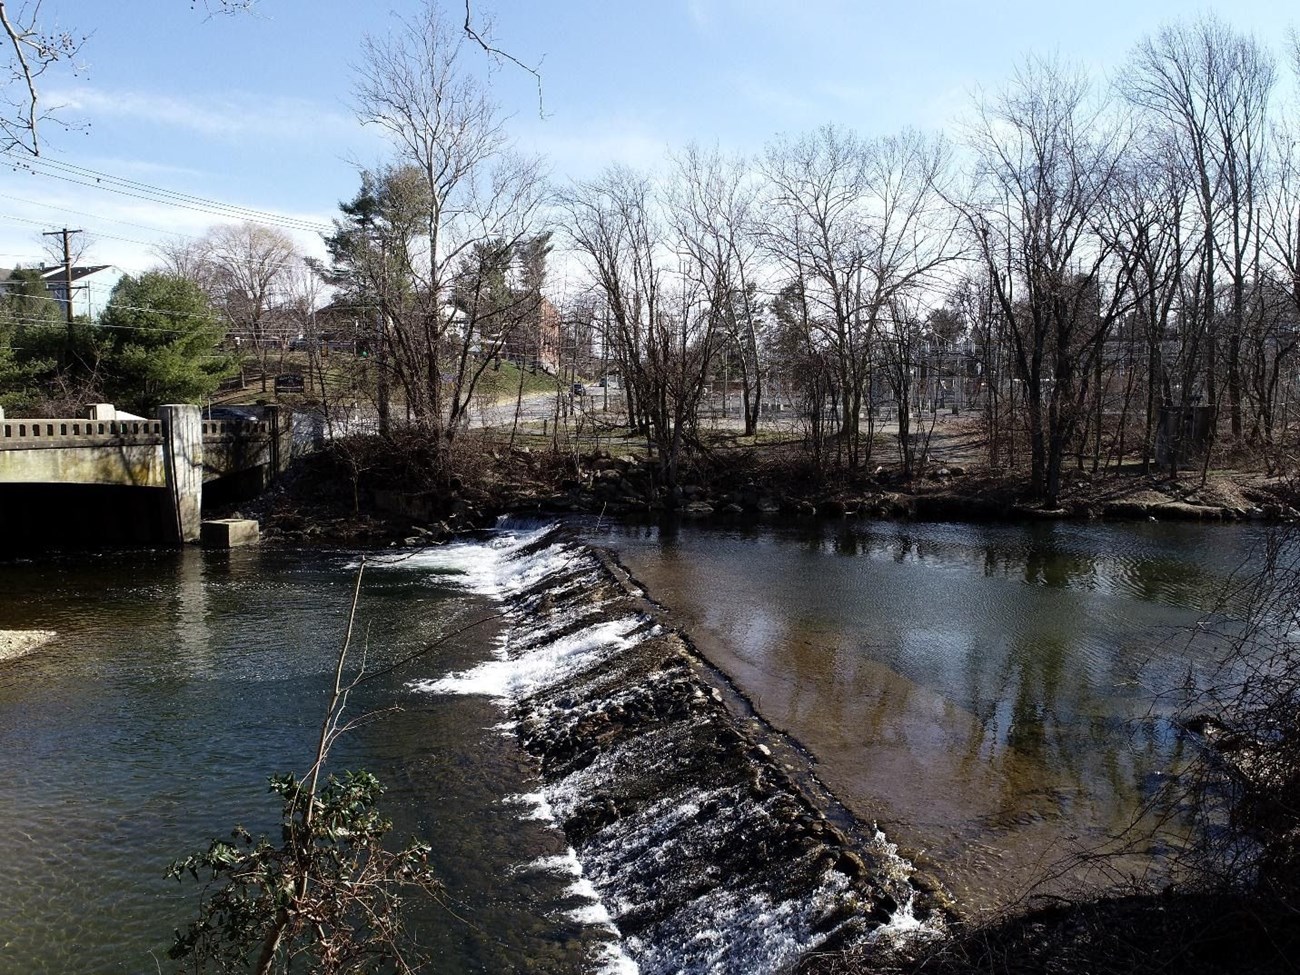 Paper Mill Dam, which is slated to be removed in the coming months. Photo credit: Jason Fischel